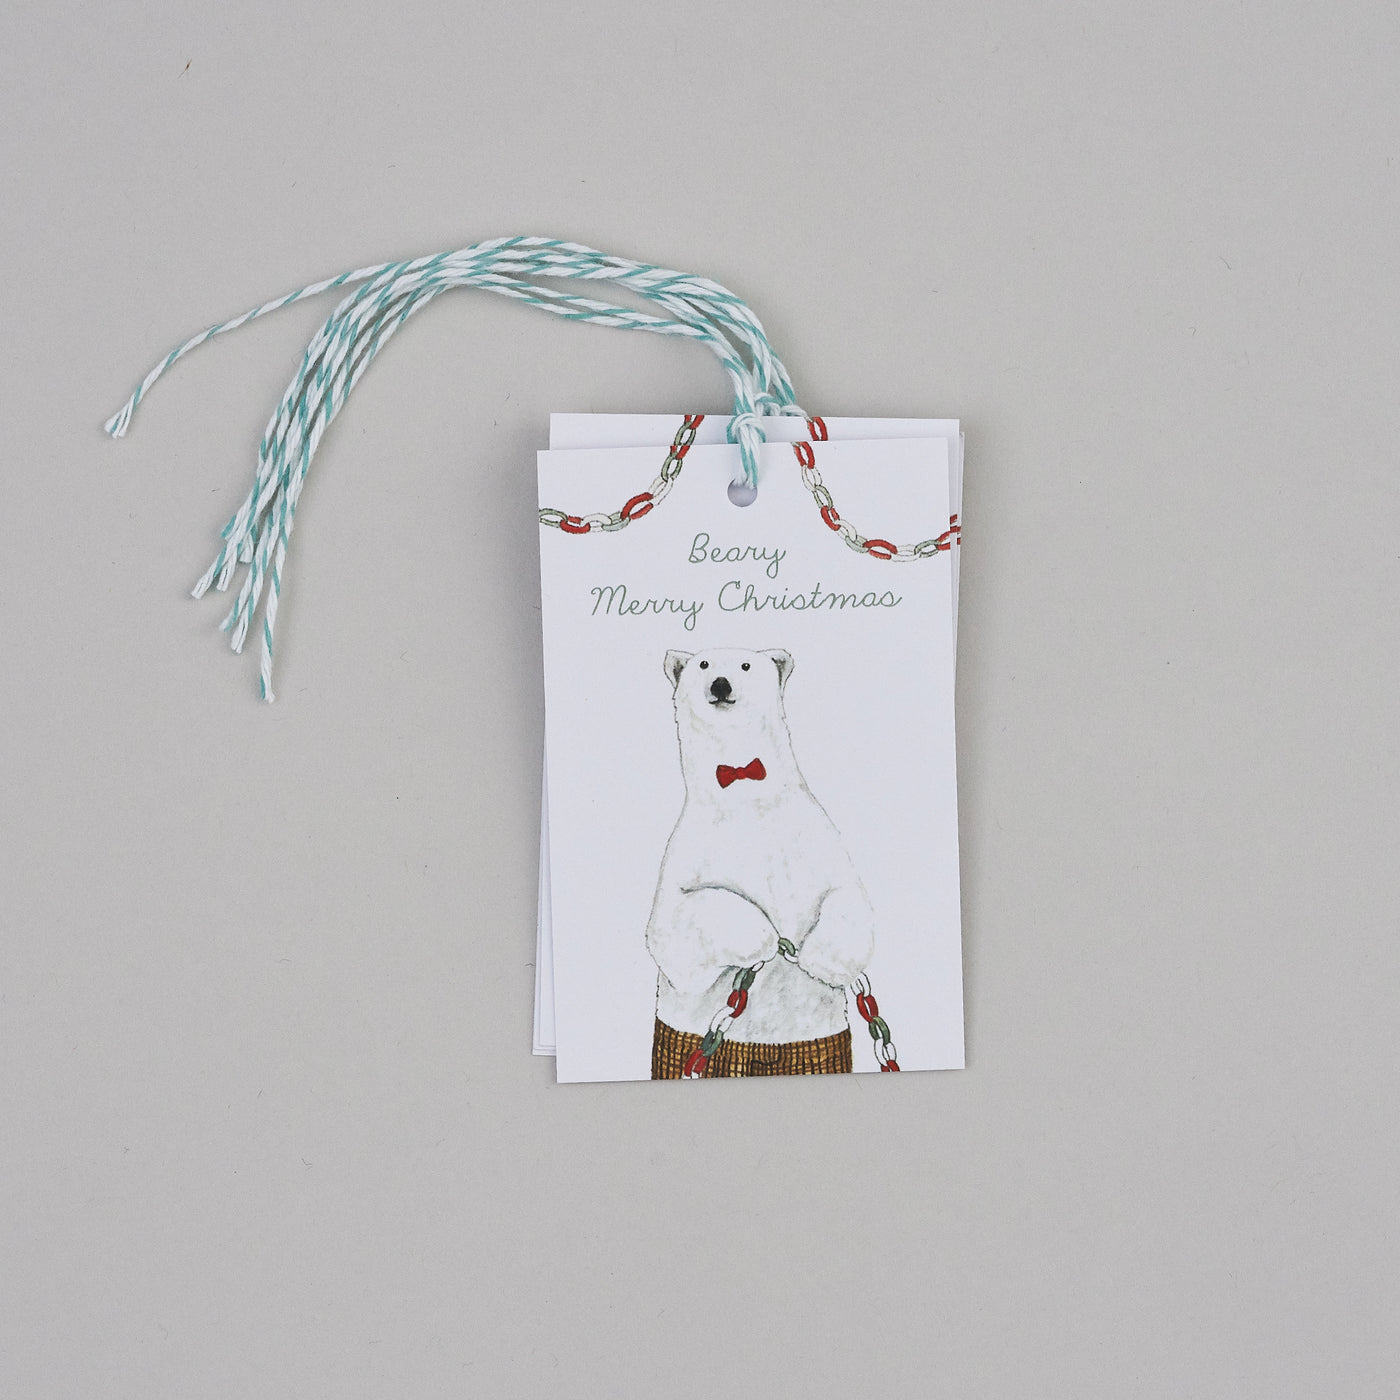 Pack of Beary Merry Christmas Gift Tags